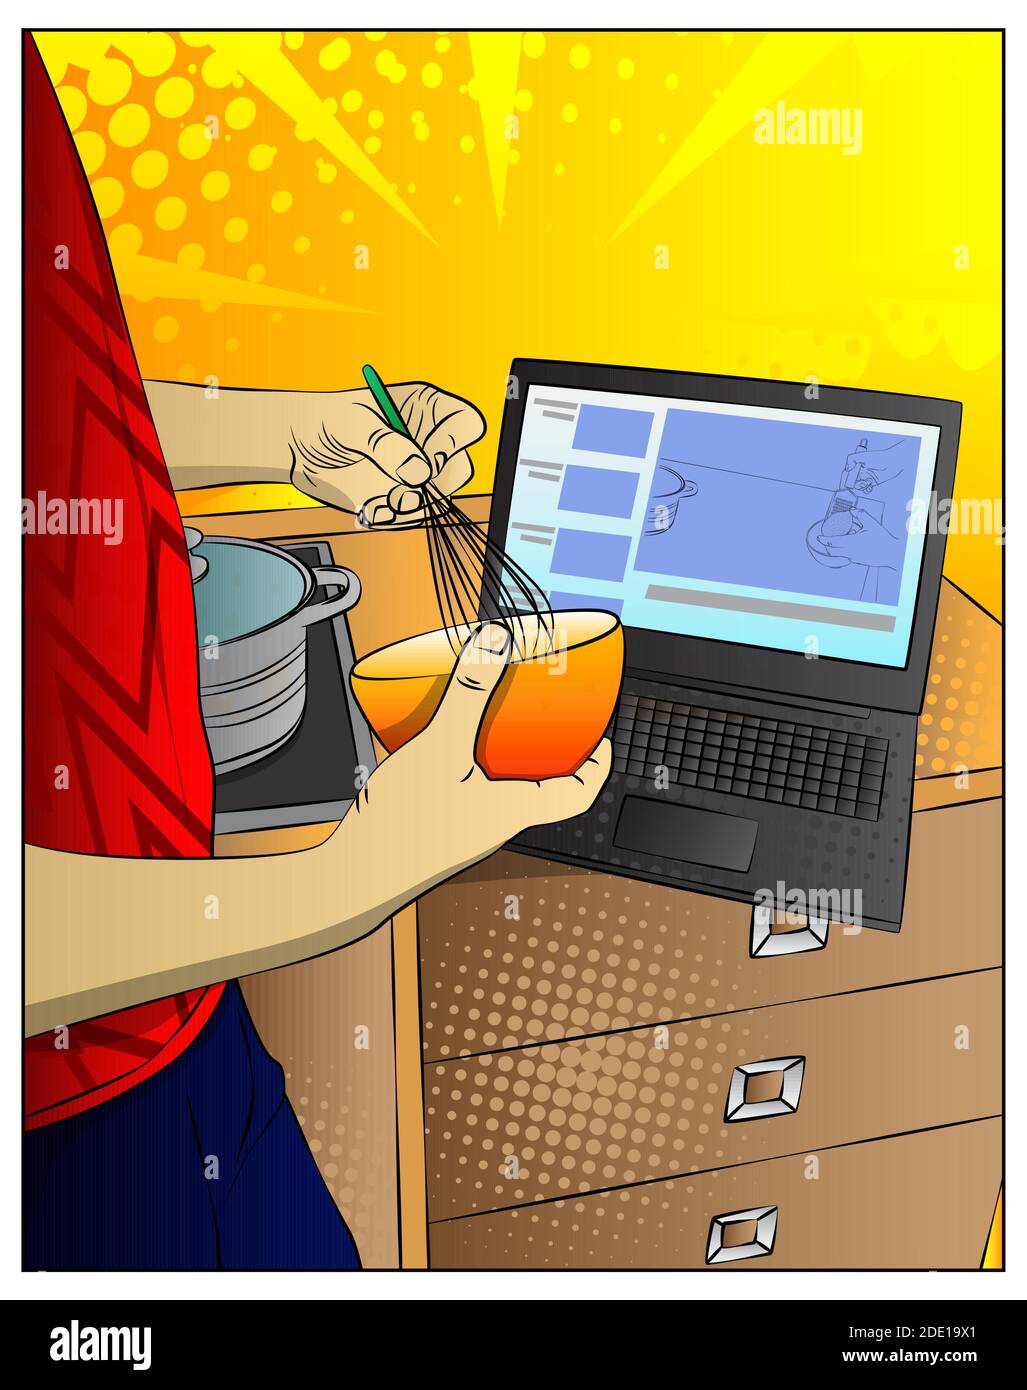 Illustration of a comic book man watching a cooking vlog and beating up eggs in bowl using whip. Baking courses online. Cooking at home. Stock Vector